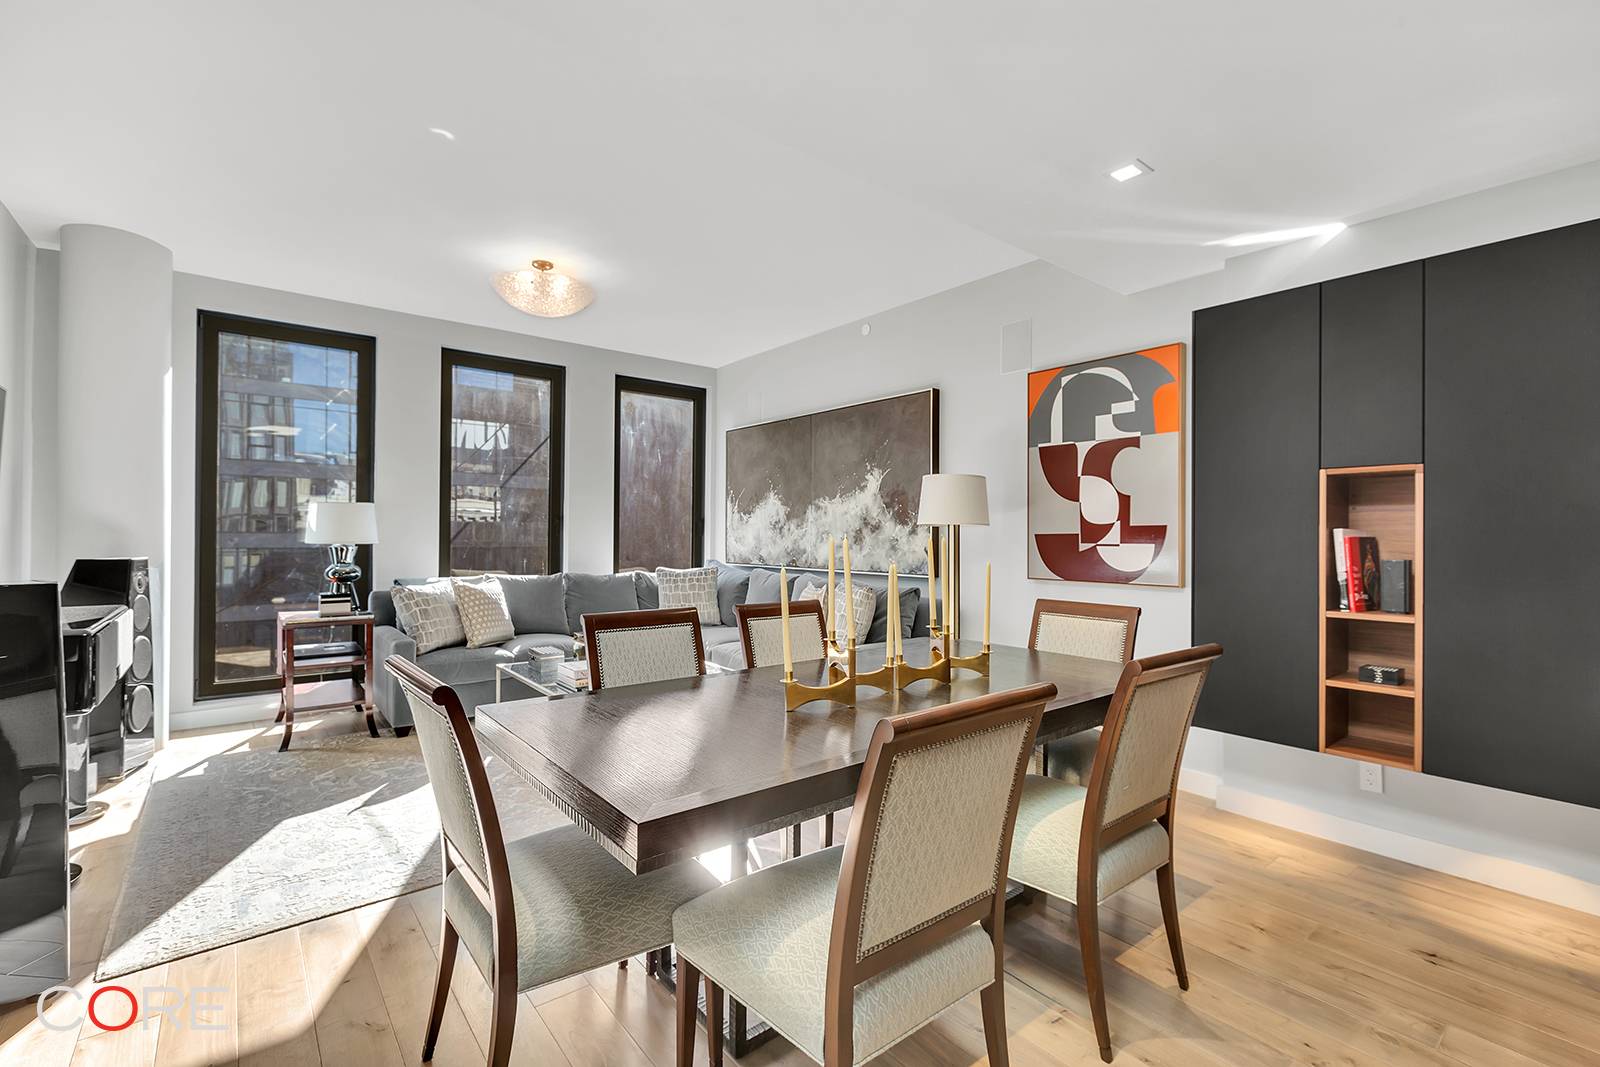 Welcome home to one of the most sought after bespoke condominiums in Hudson Square.